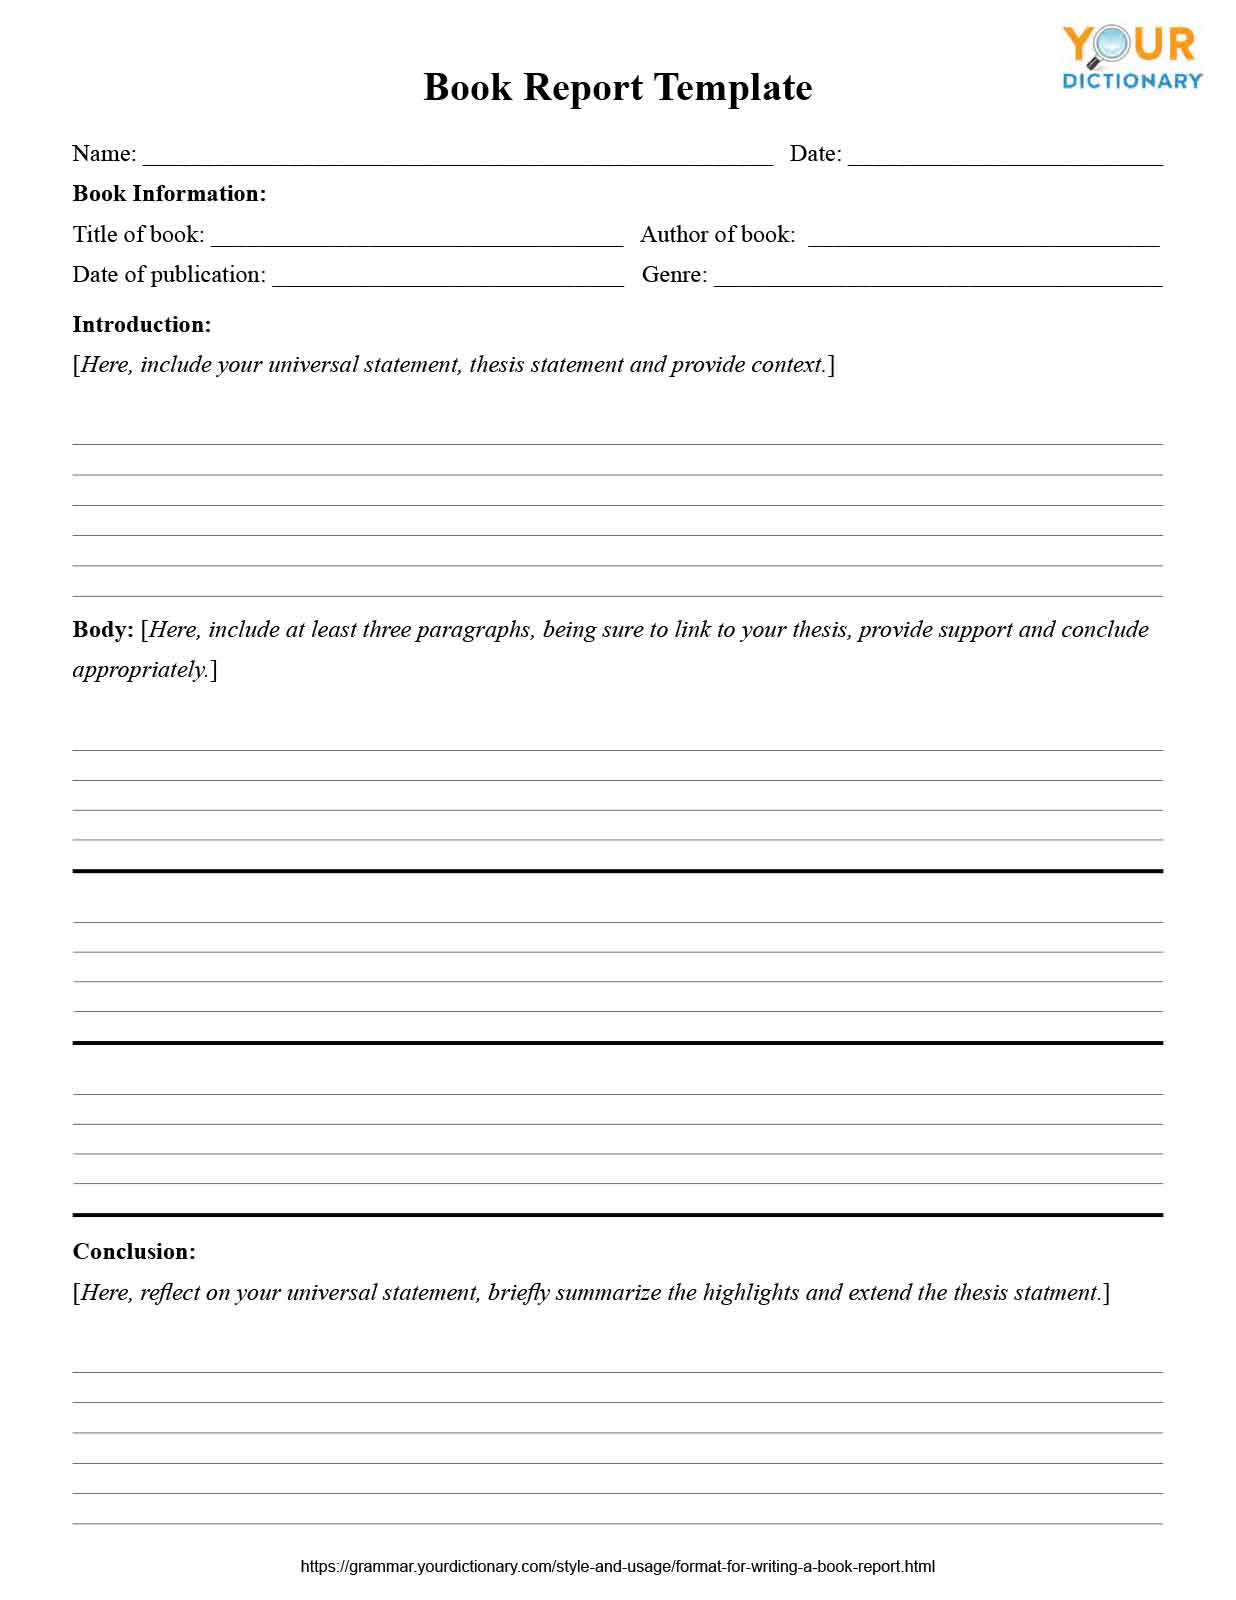 Format For Writing A Book Report Throughout Skeleton Book Report Template